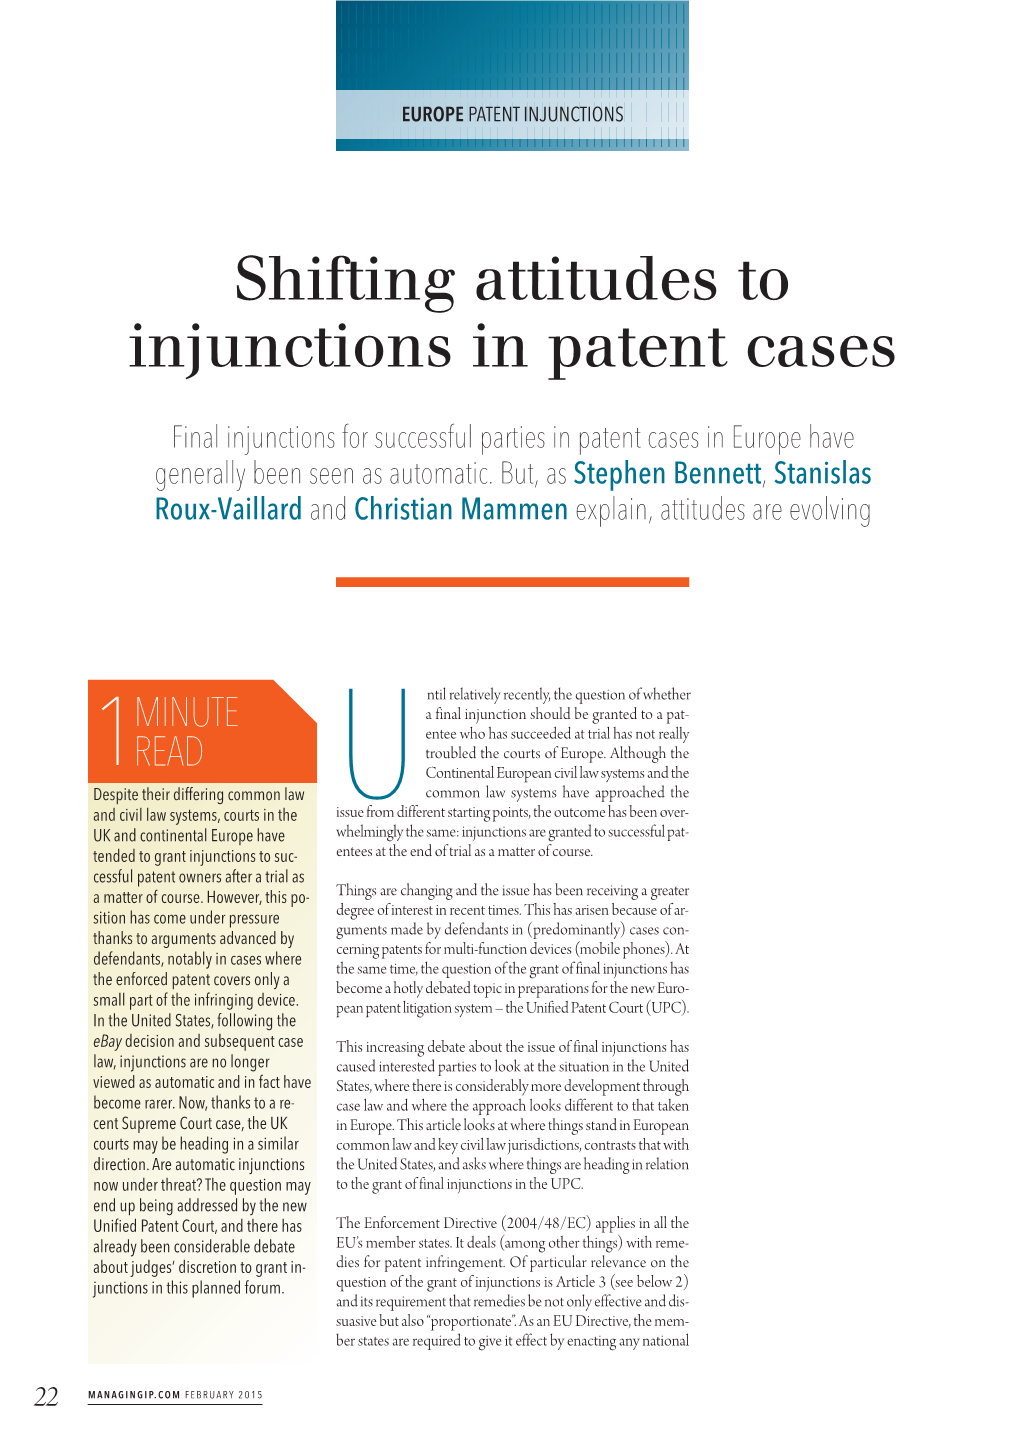 Shifting Attitudes to Injunctions in Patent Cases